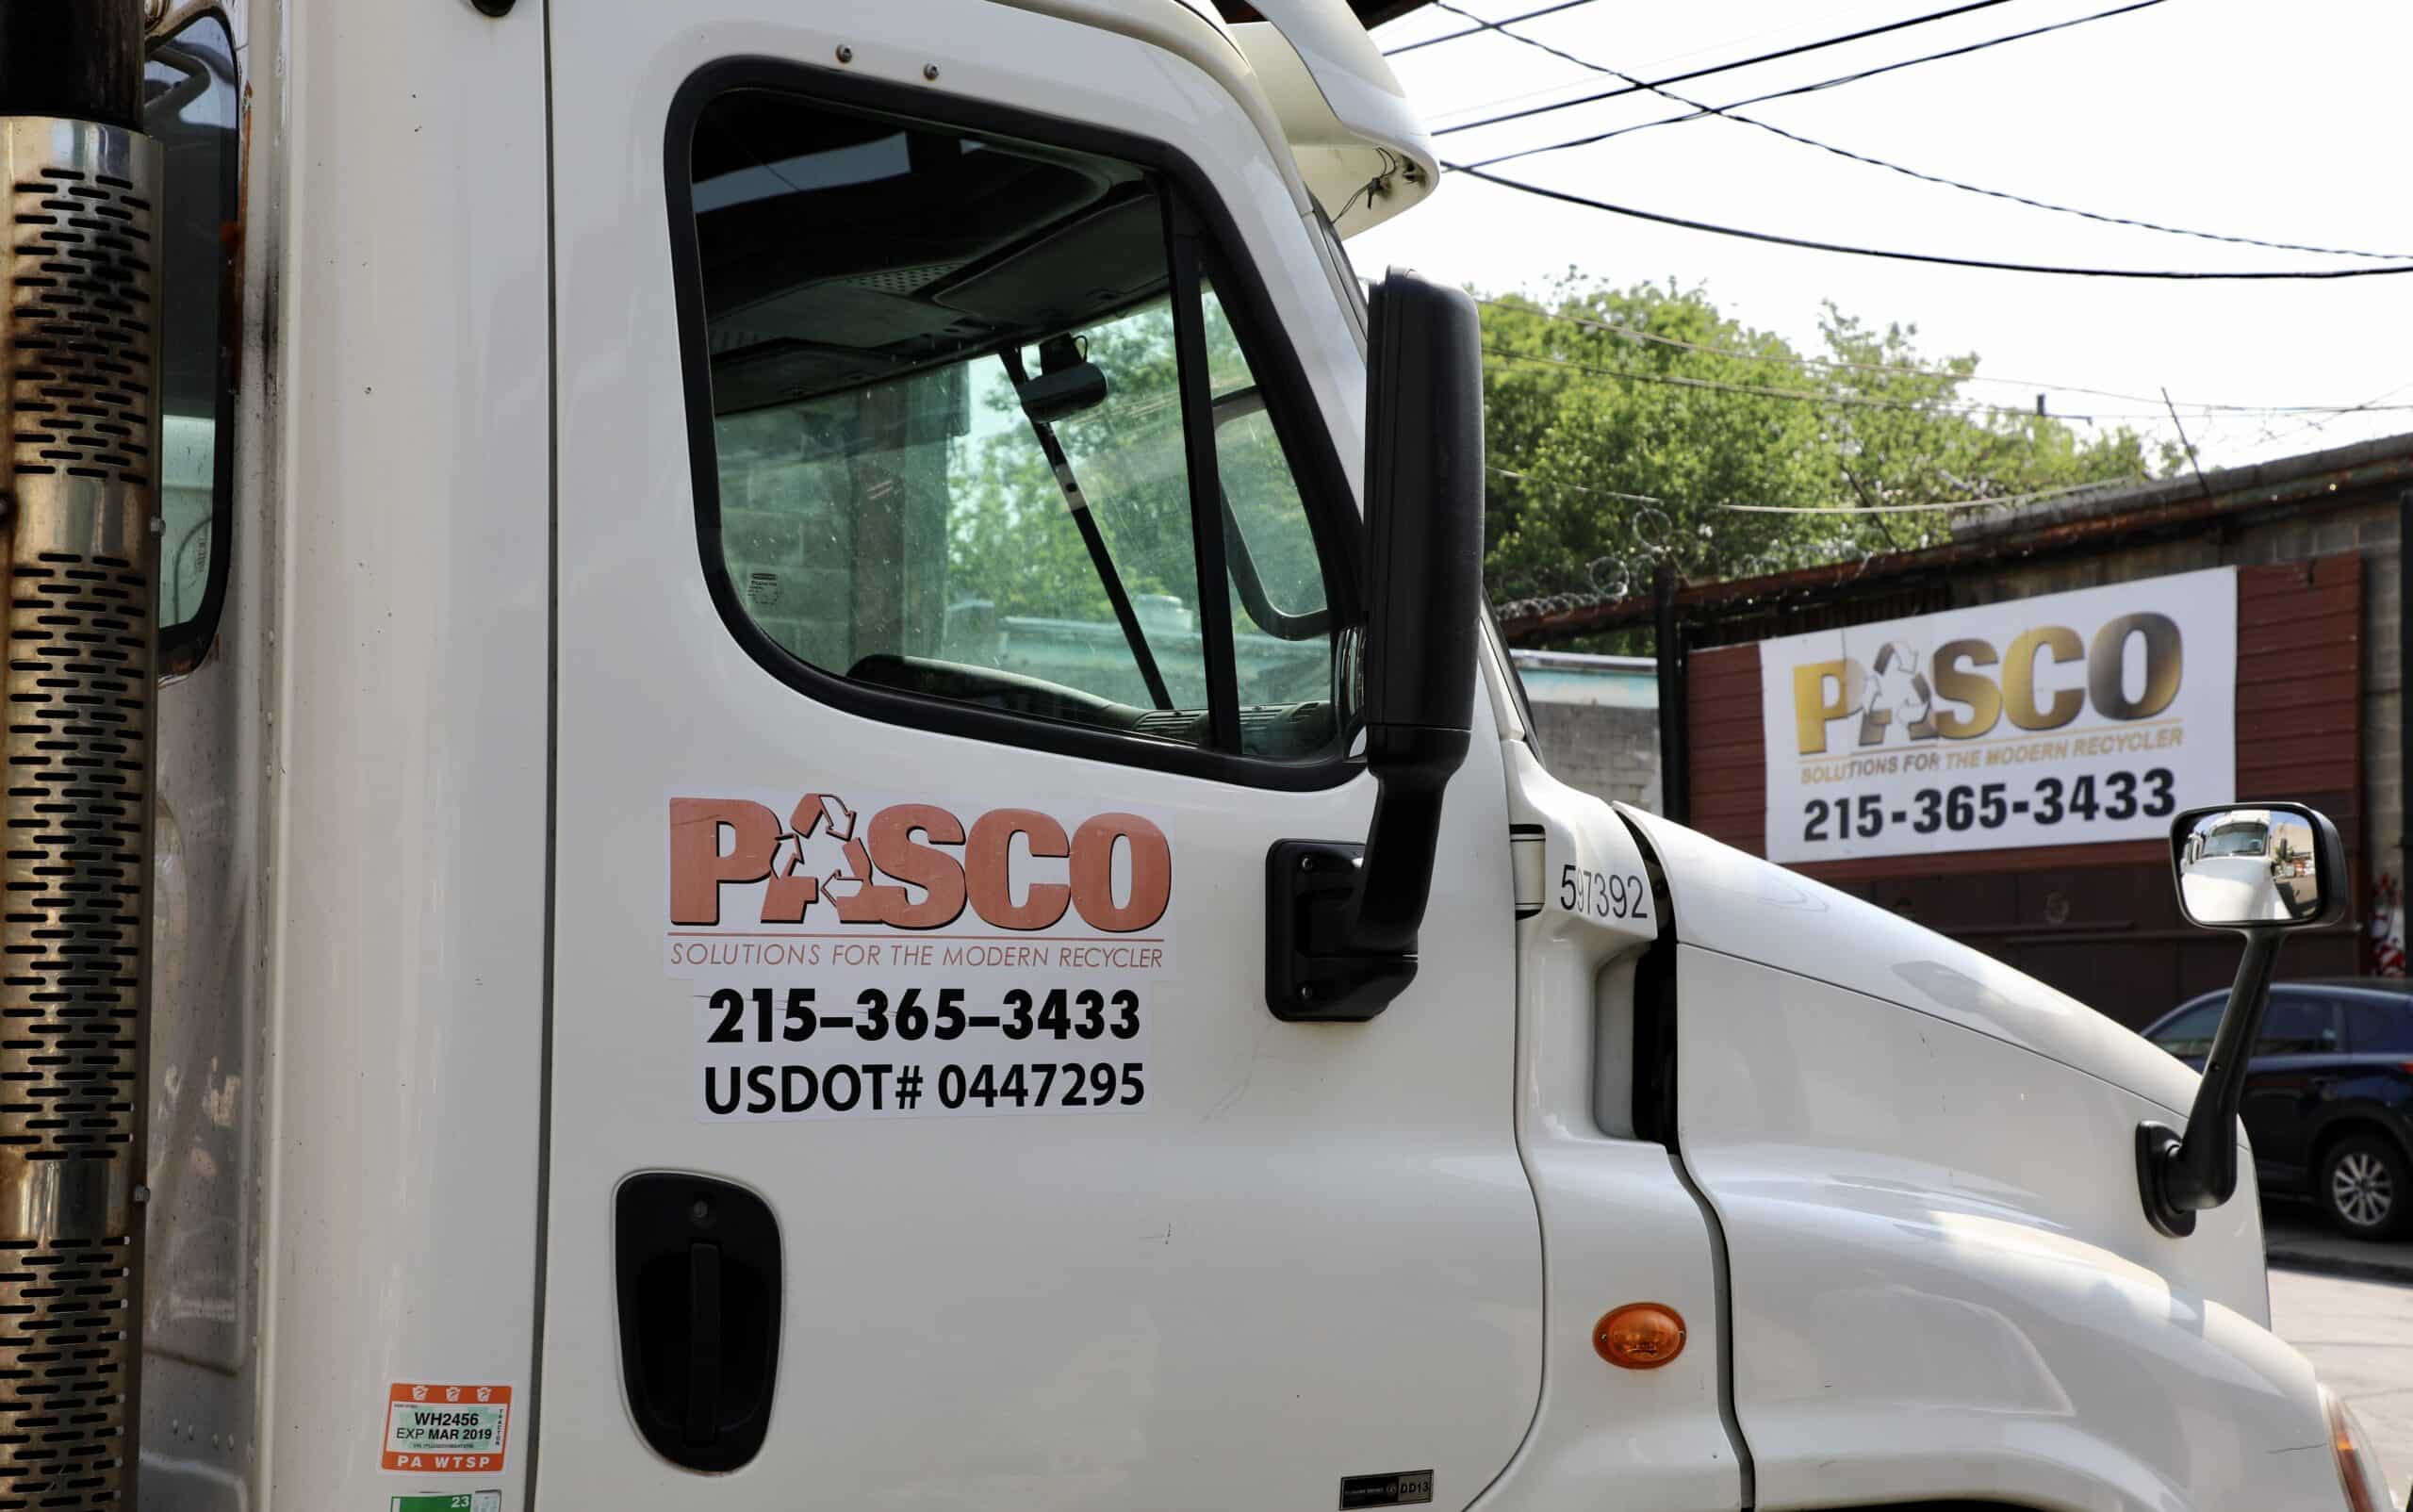 Pasco cab of truck